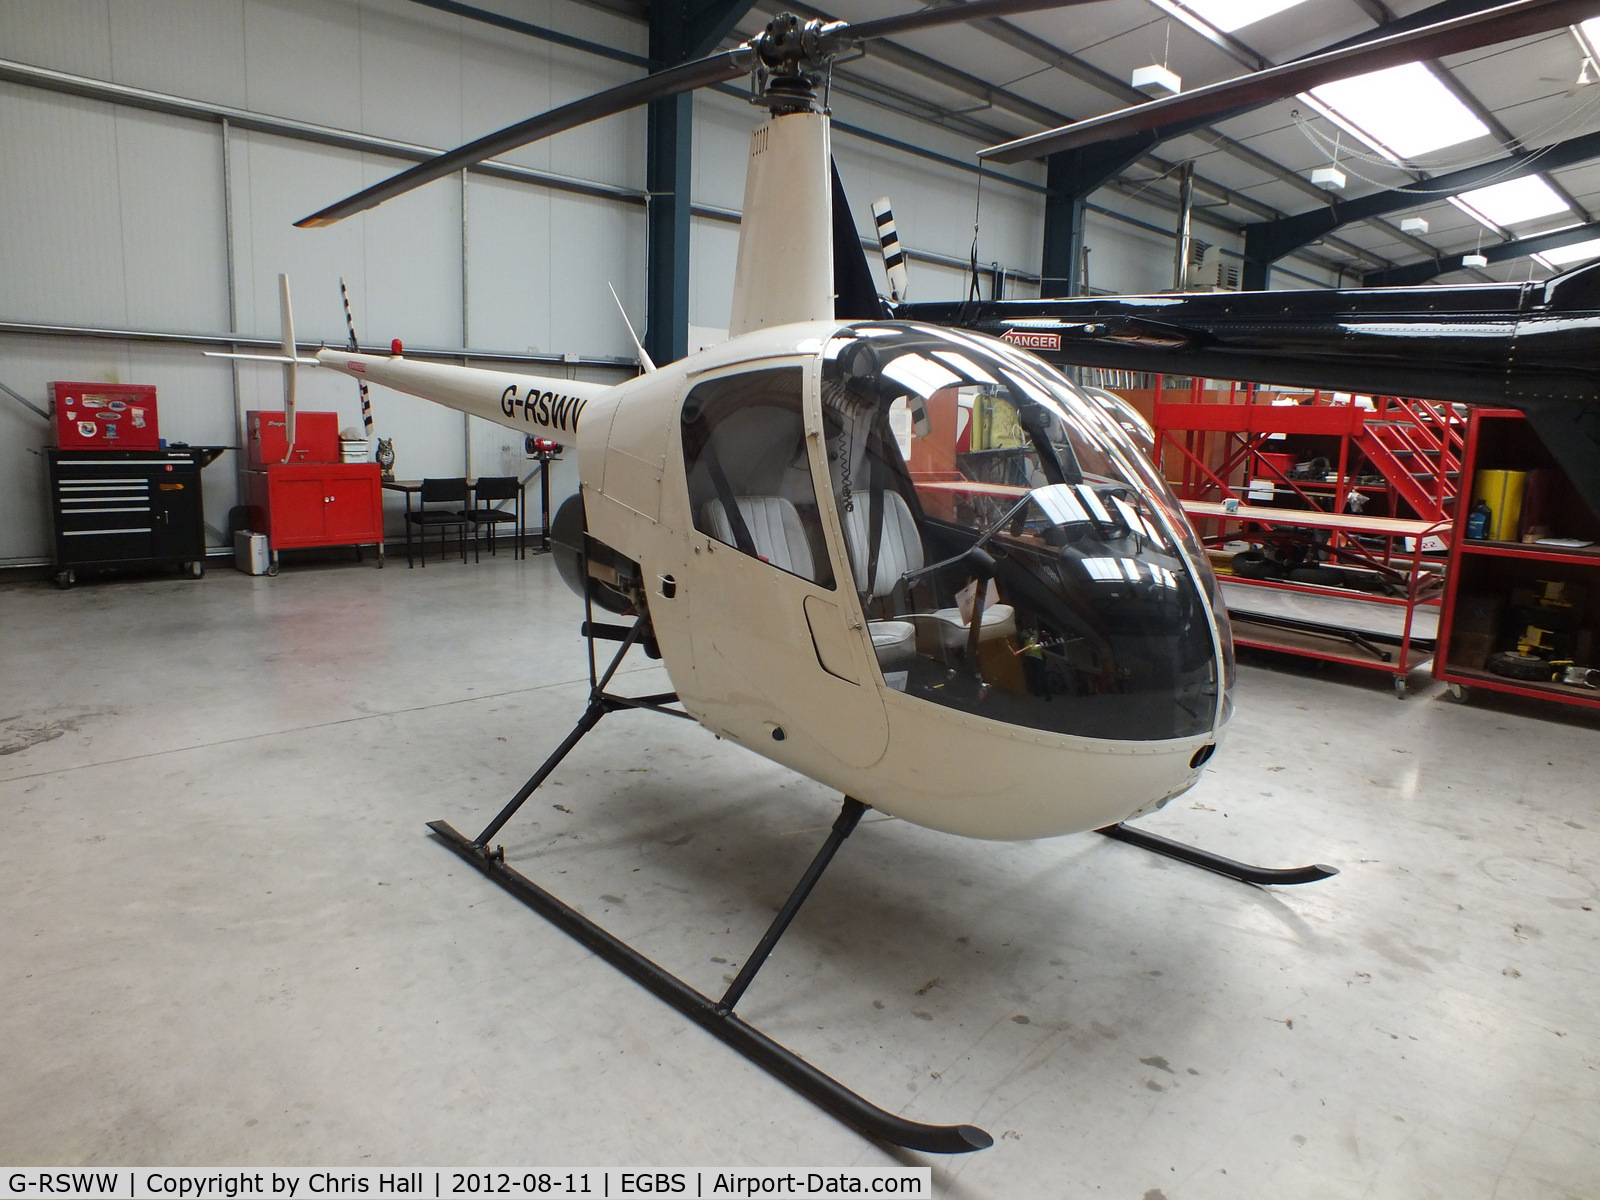 G-RSWW, 1991 Robinson R22 Beta C/N 1775, inside the Tiger Helicopter's Hangar at Shobdon Airfield, Herefordshire